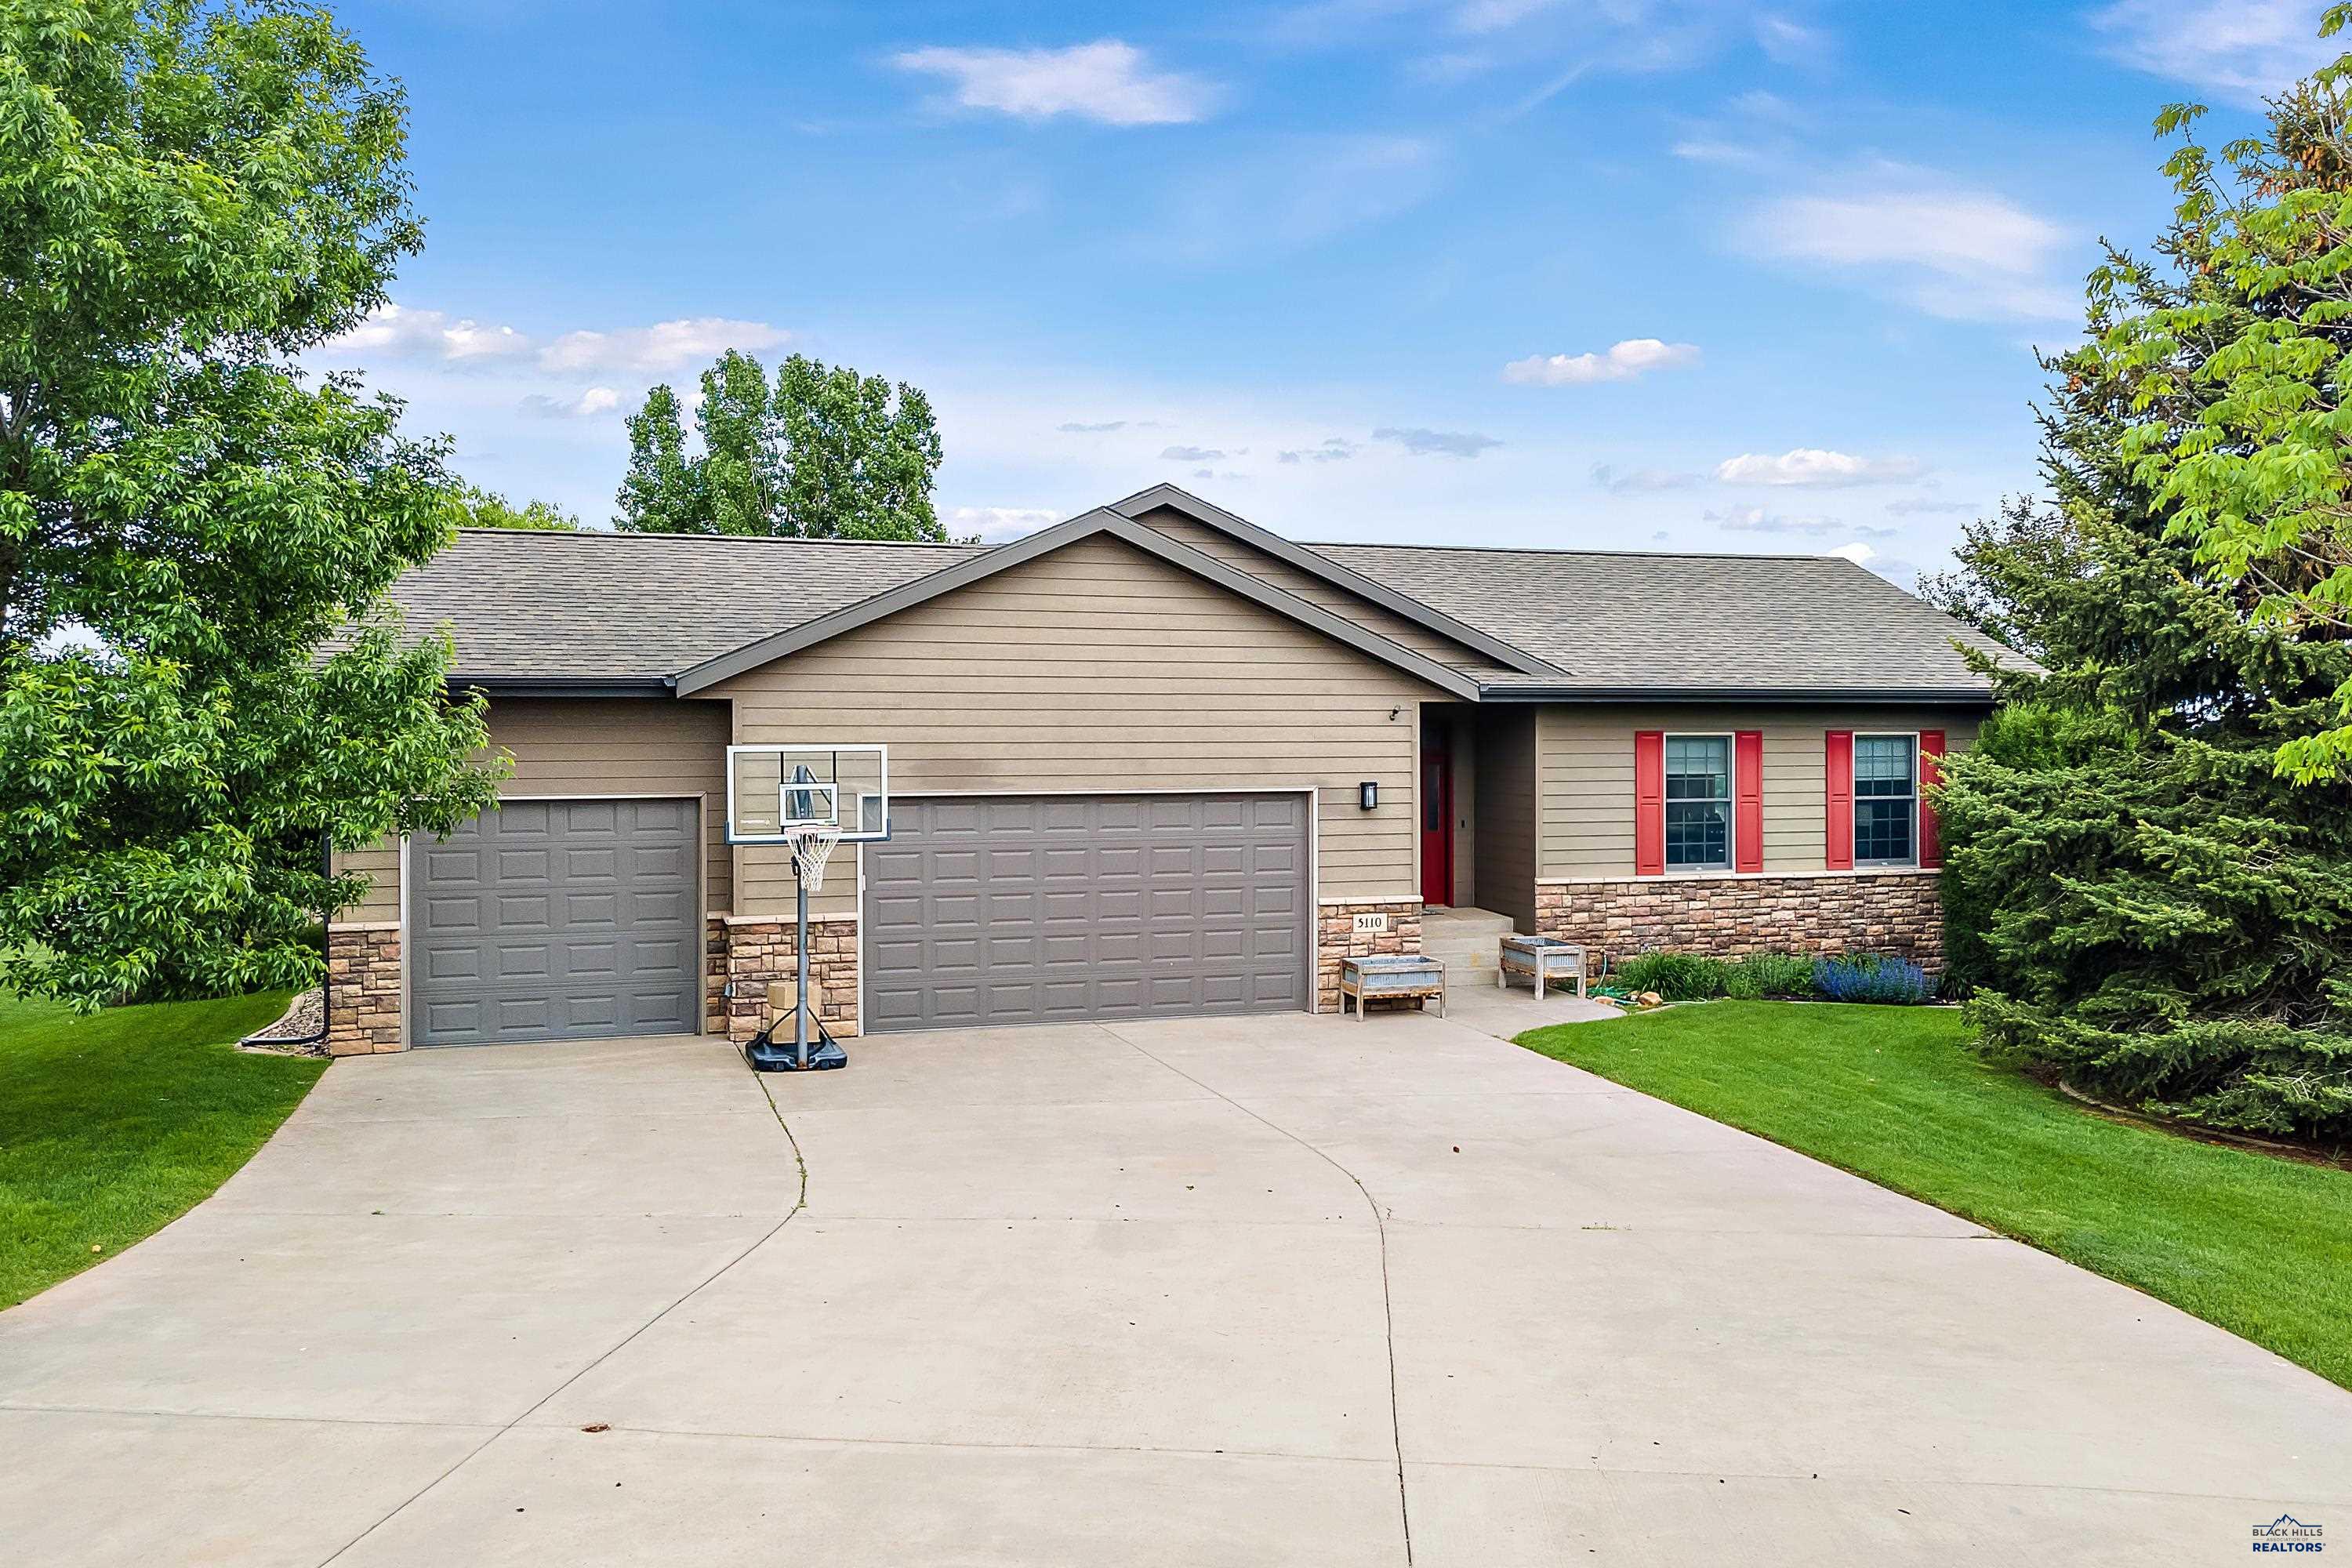 Listed by Jenni Brue, Keller Williams, 605-381-1055. Need bedrooms? This is your new home! Seven bedrooms complete this 4200+ square foot home! This home has been meticulously well cared for and for the first time ever is ready for new owners. It's nicely situated at the end of a cul-de-sac on a 1.31 acre lot in town! You will feel like you are in your own private park sitting on the back northeast deck overlooking the many mature trees & fantastic view of the city. Inside you will find an open concept of the living room, kitchen & large dining area, perfect for entertaining. There are three large bedrooms on the main level including the Master Suite with a vaulted ceiling, and picture window overlooking the backyard. Downstairs has an exceptional sized family room with gas fireplace which walks out to the patio. Four large bedrooms complete this level, all which have garden level windows. Laundry hookups available in the lower level as well as 10'x19' laundry room on the main floor.